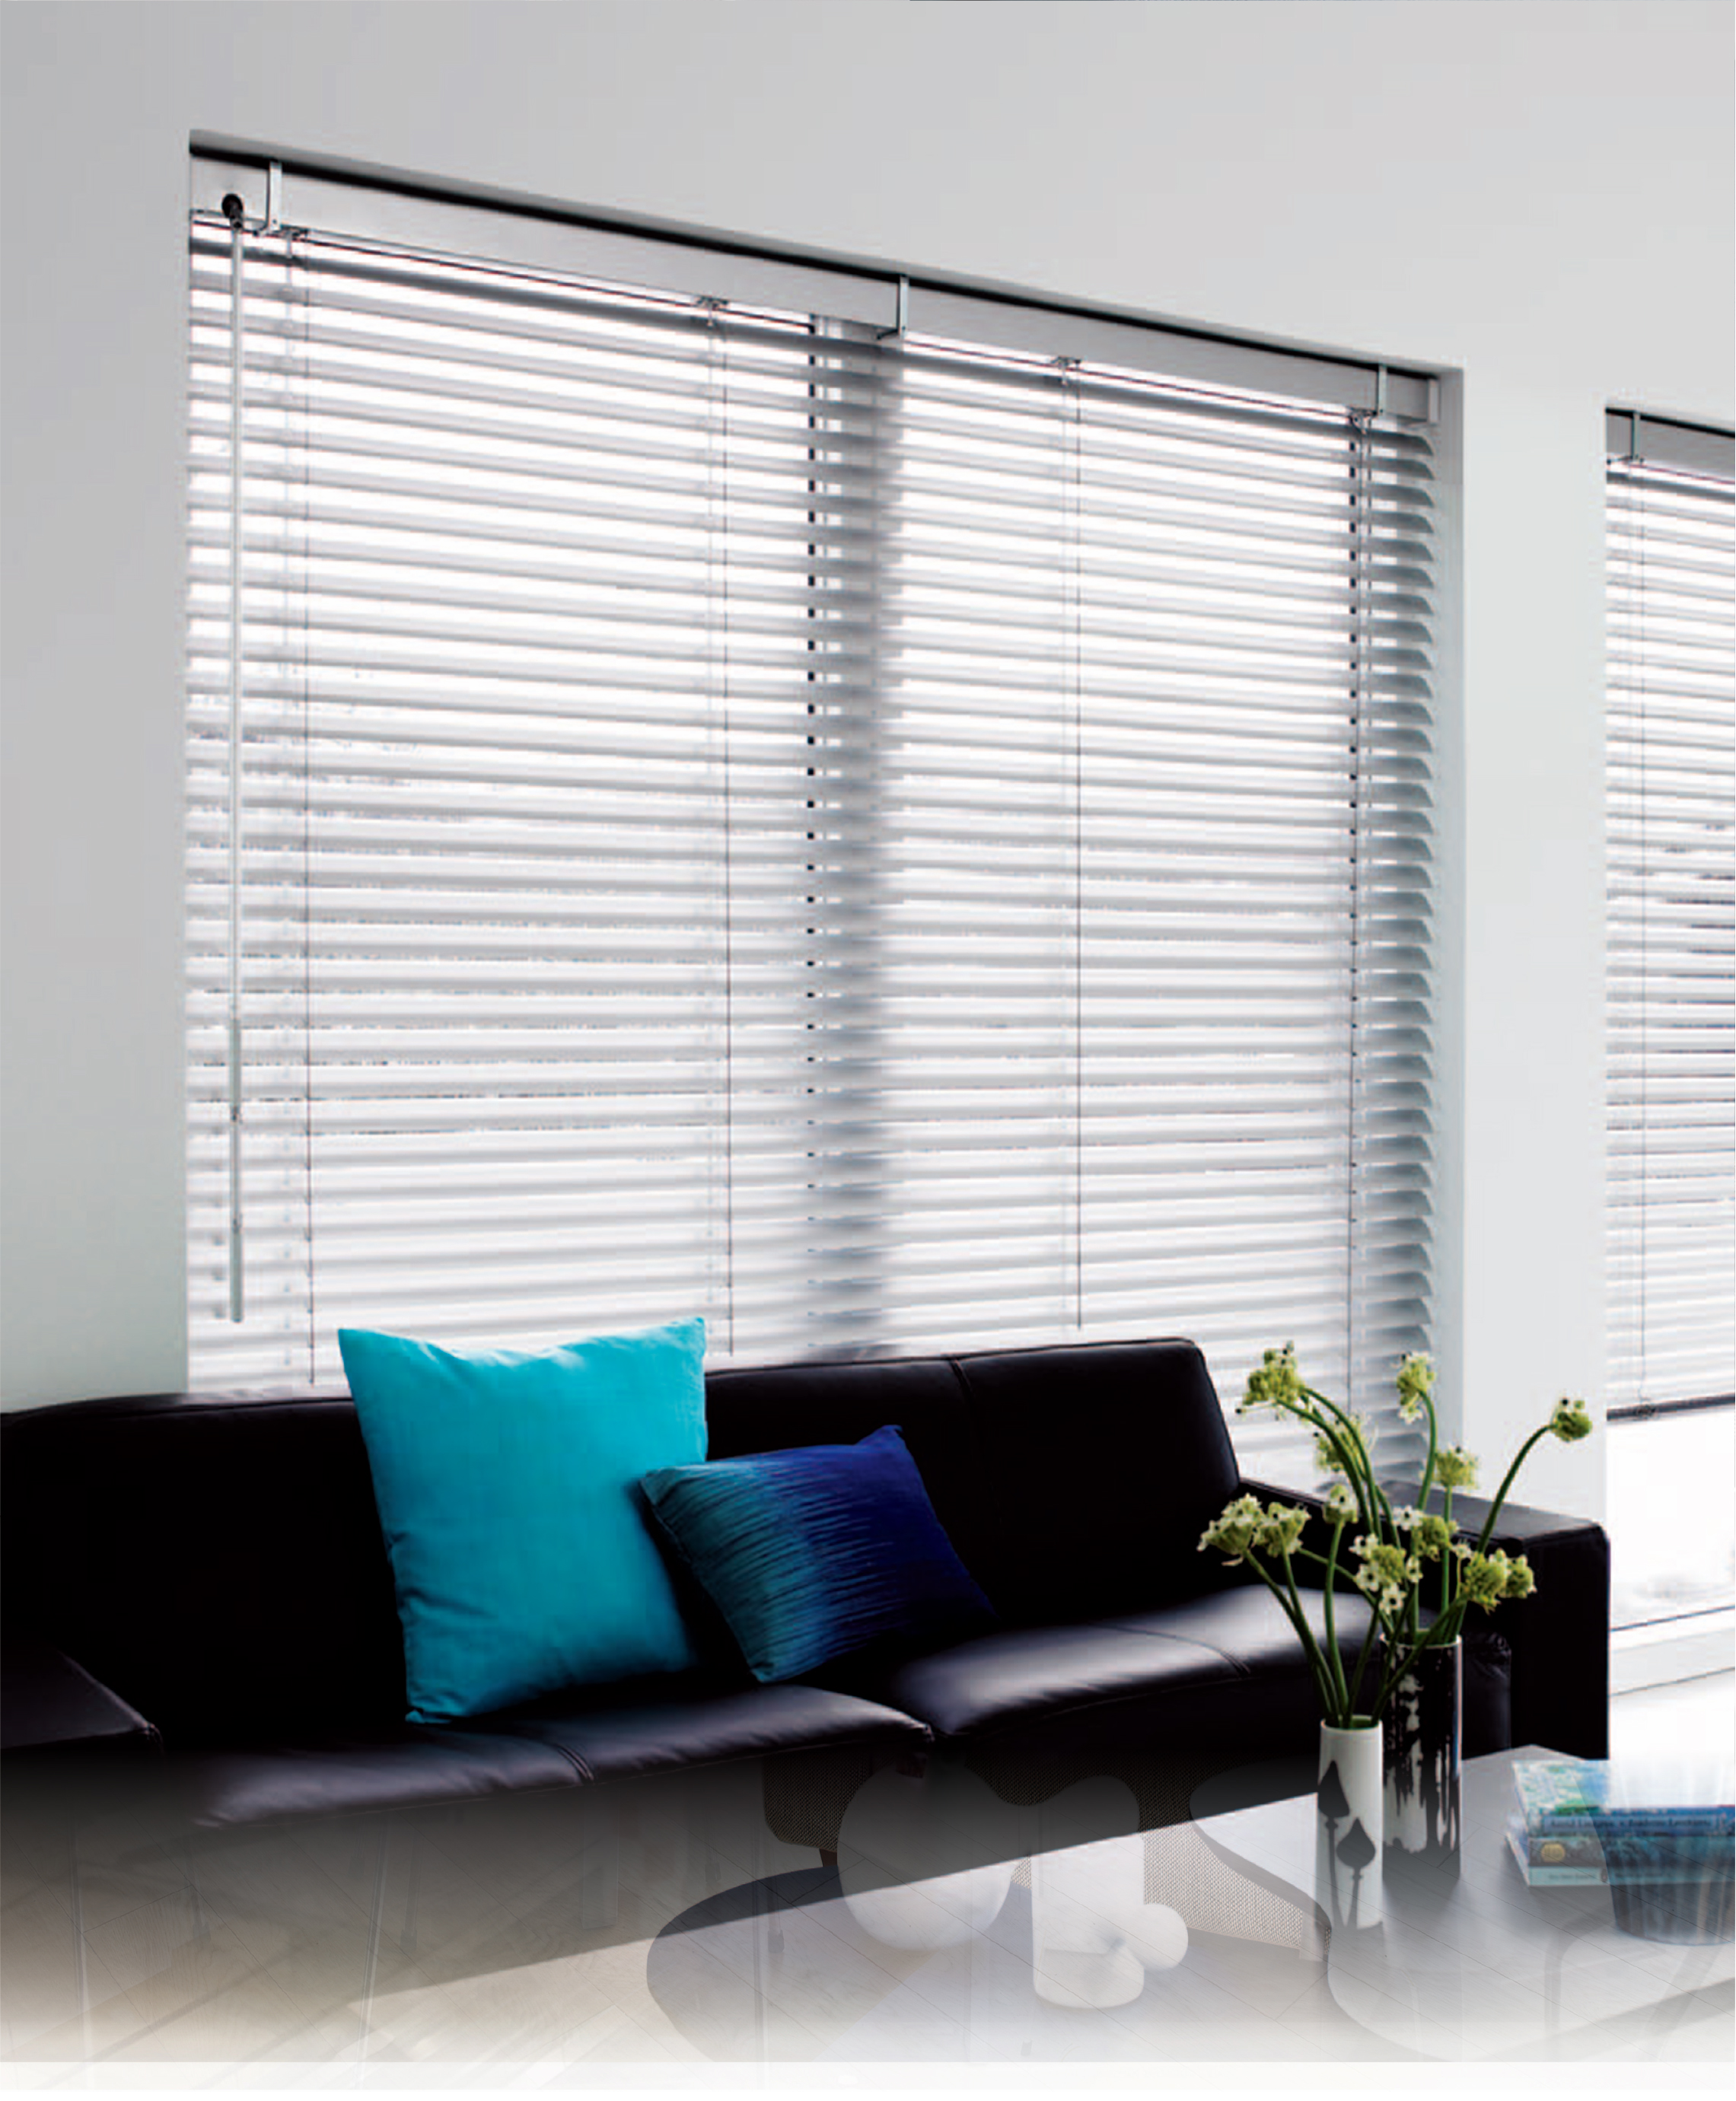 Reasons why you should go for Venetian blinds instead of standard curtains